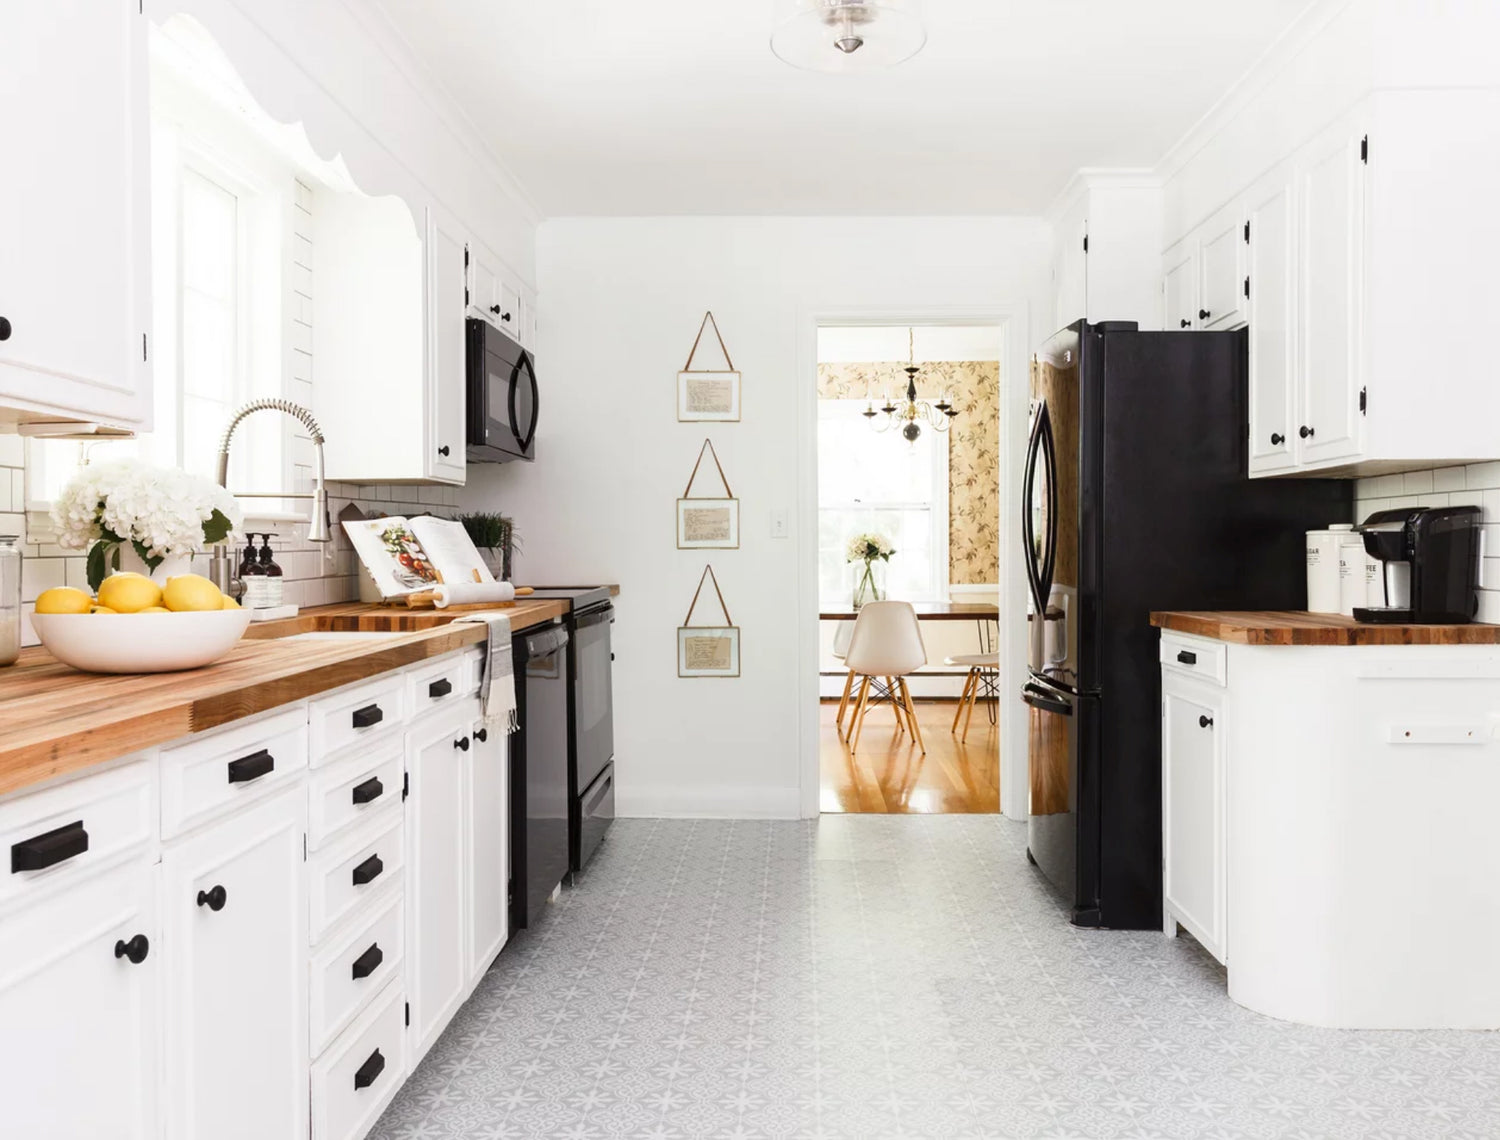 Renovate Your Rental Floor - The Best Temporary DIY makeover